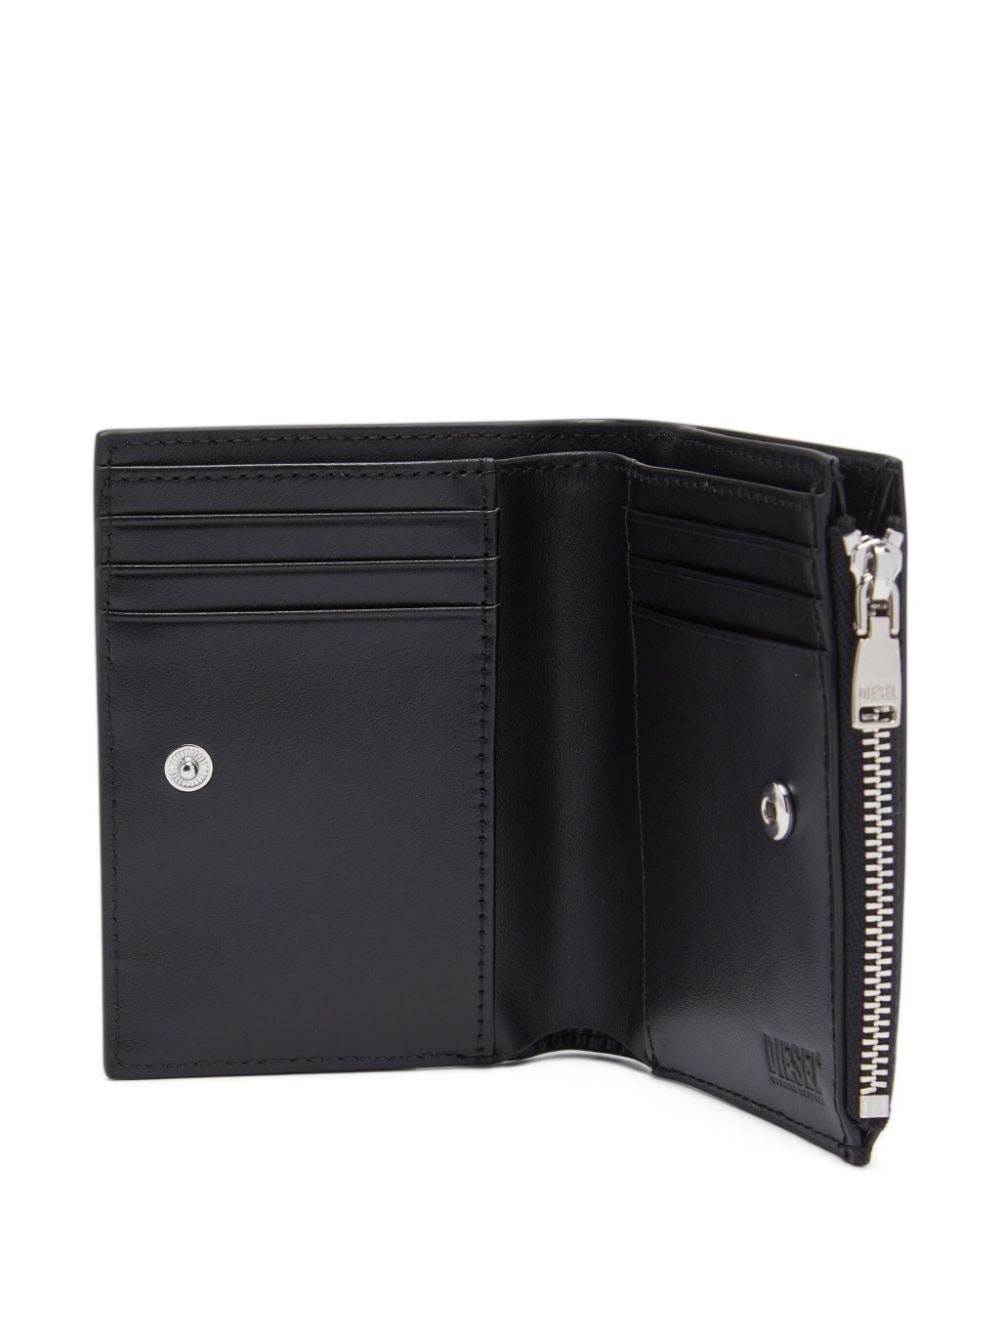 1dr-Fold leather wallet - 3